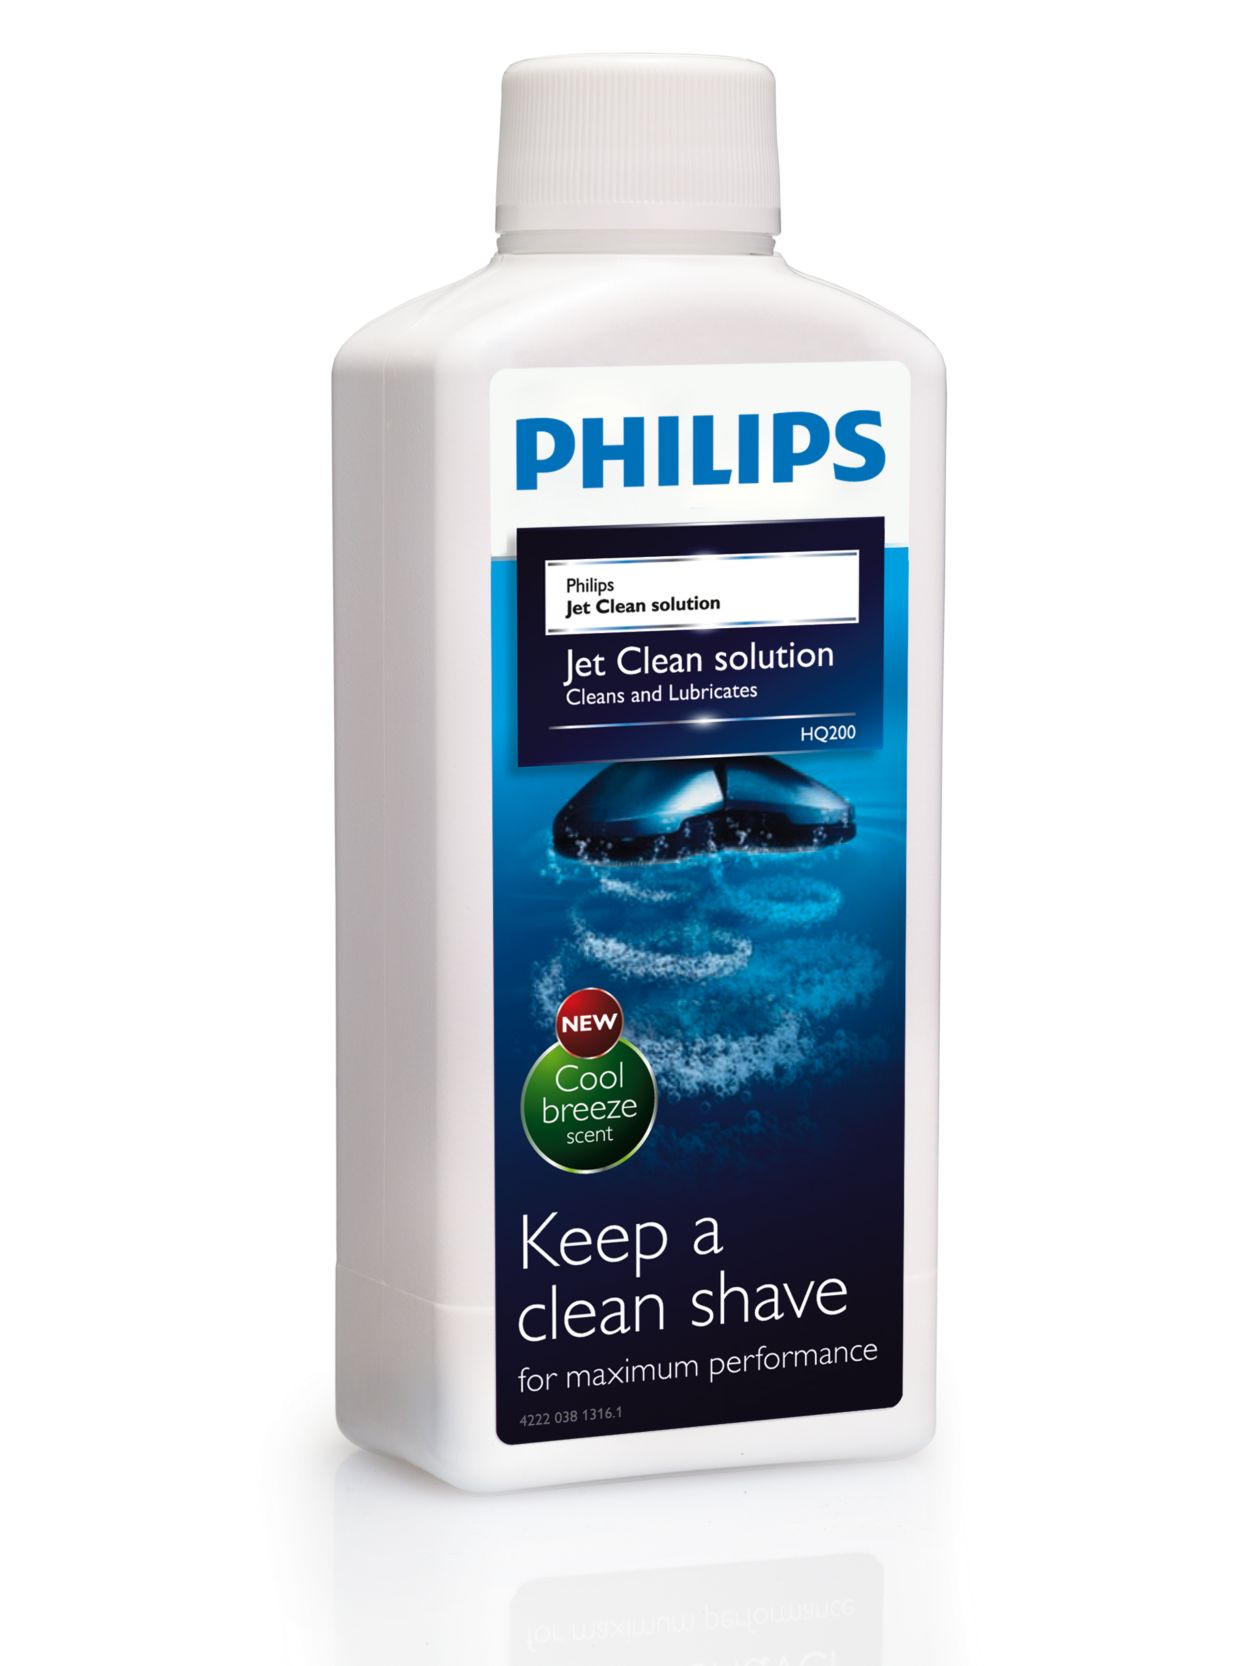 Keep a clean shave